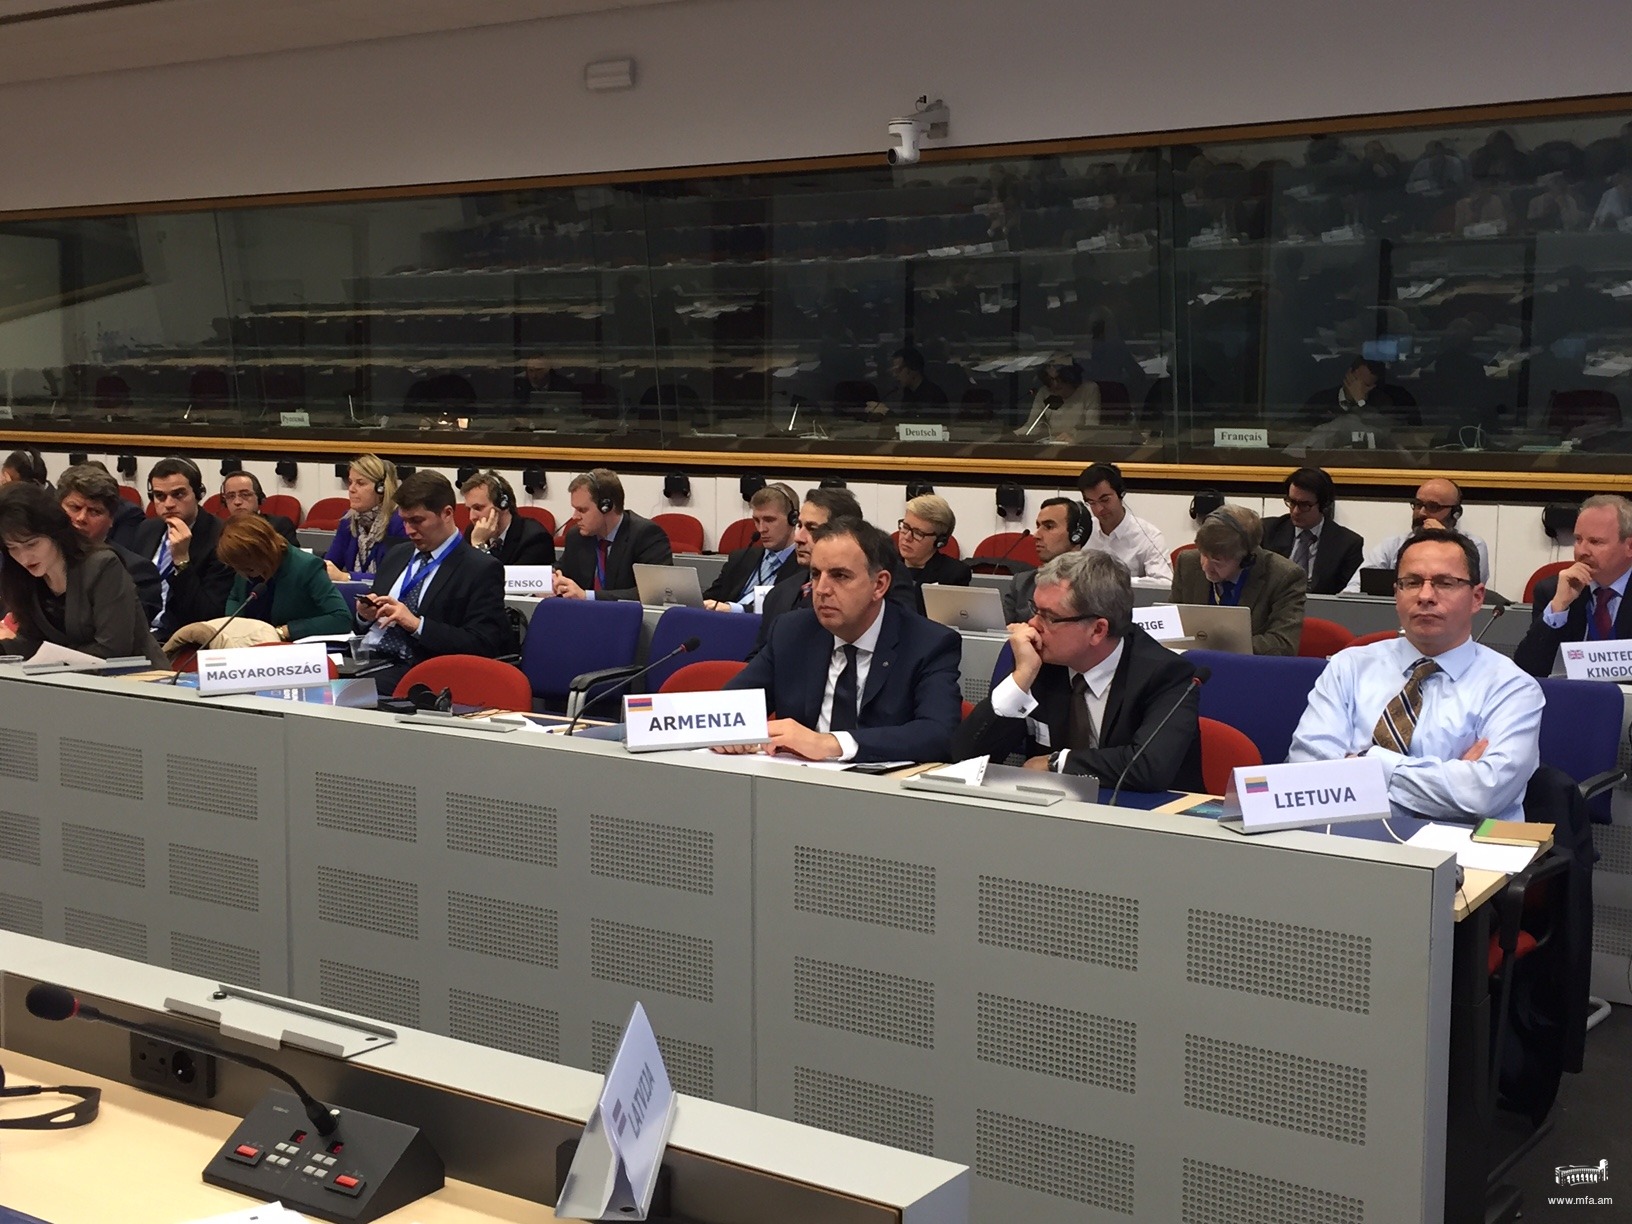 Deputy Minister Nazarian participated in the meeting of Senior Officials of Eastern Partnership states in Brussels